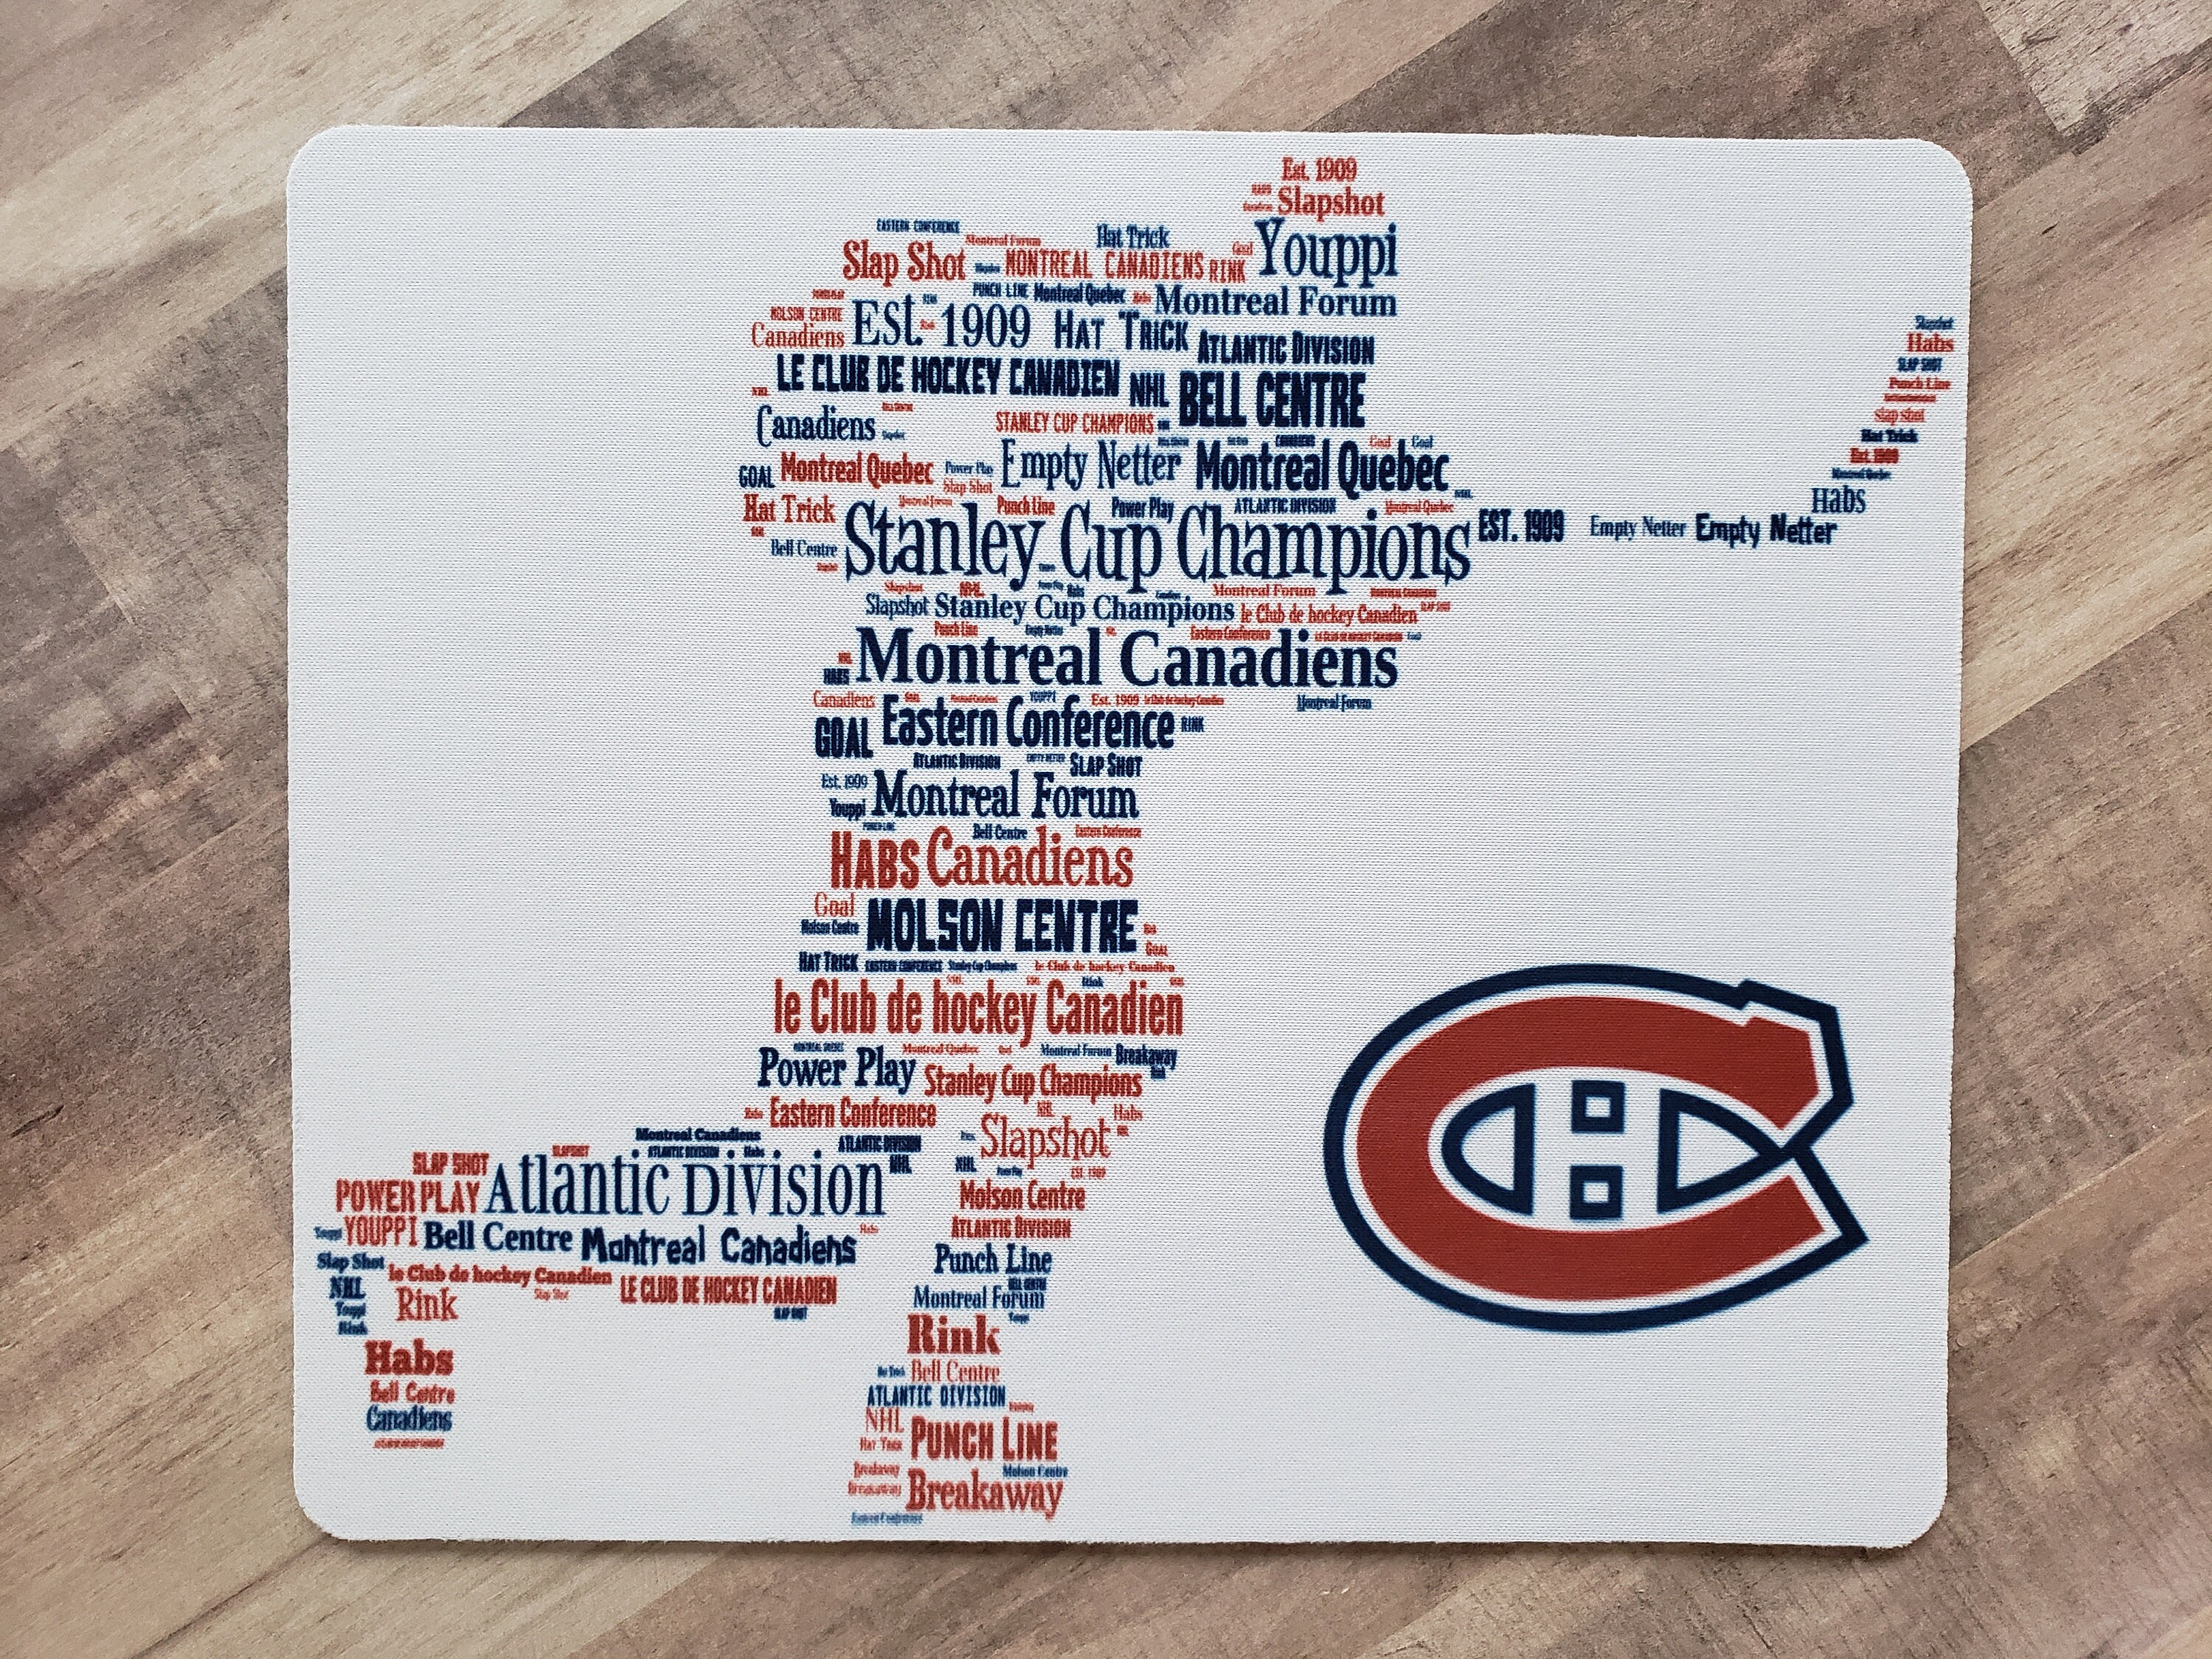 Canadiens Club 1909 programs looks to 'engage fan base